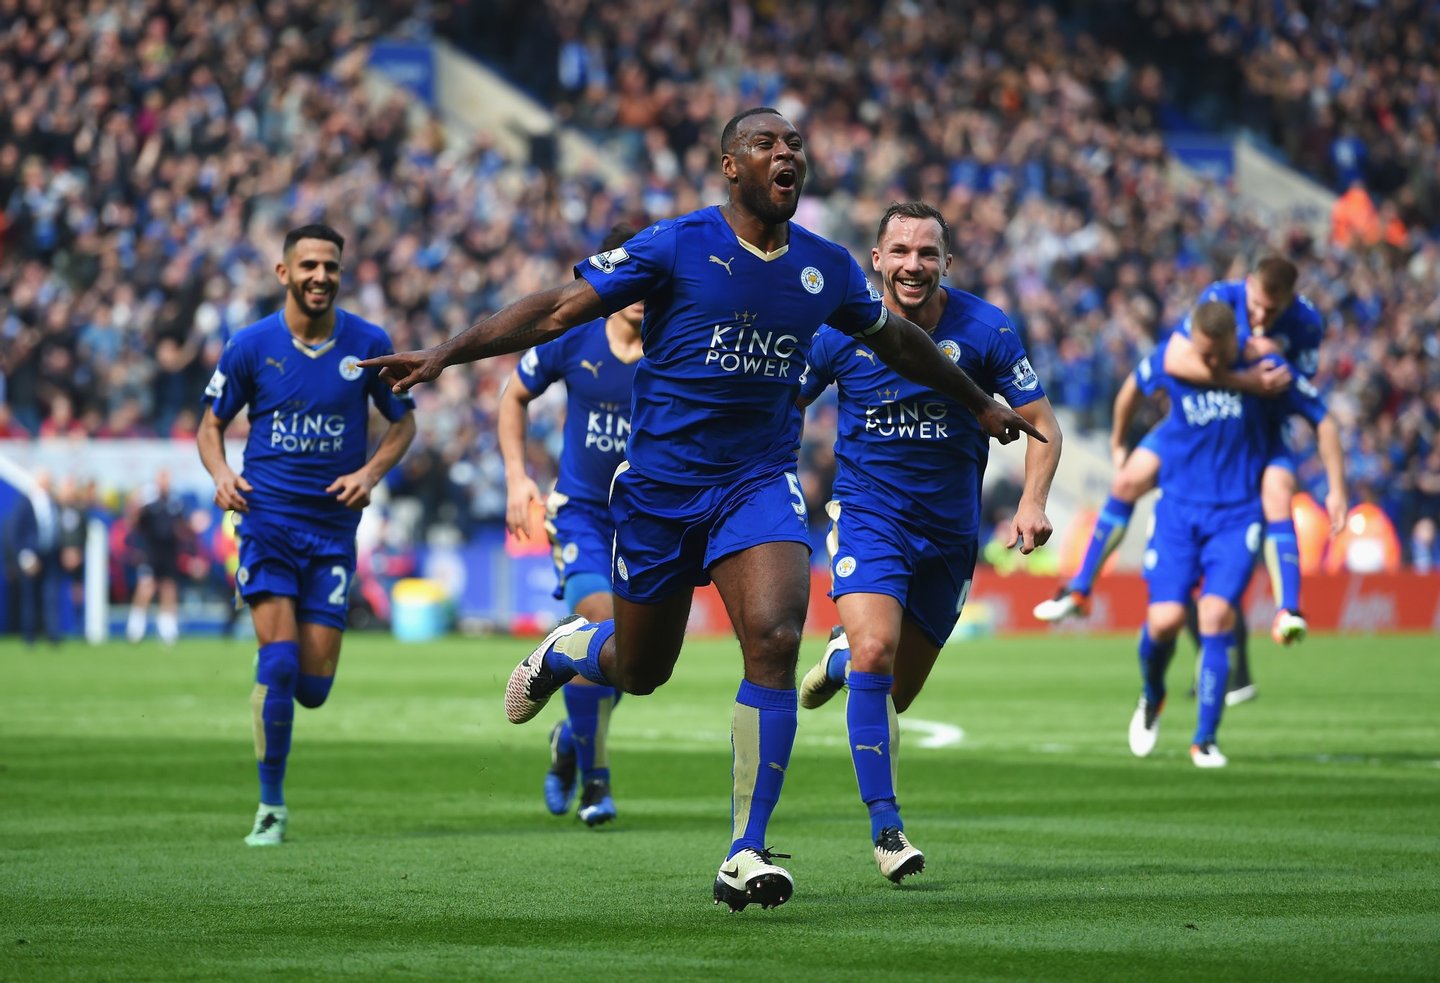 LEICESTER, ENGLAND - APRIL 03: Wes Morgan of Leicester City celebrates with team mates as he scores their first goal during the Barclays Premier League match between Leicester City and Southampton at The King Power Stadium on April 3, 2016 in Leicester, England. (Photo by Michael Regan/Getty Images)